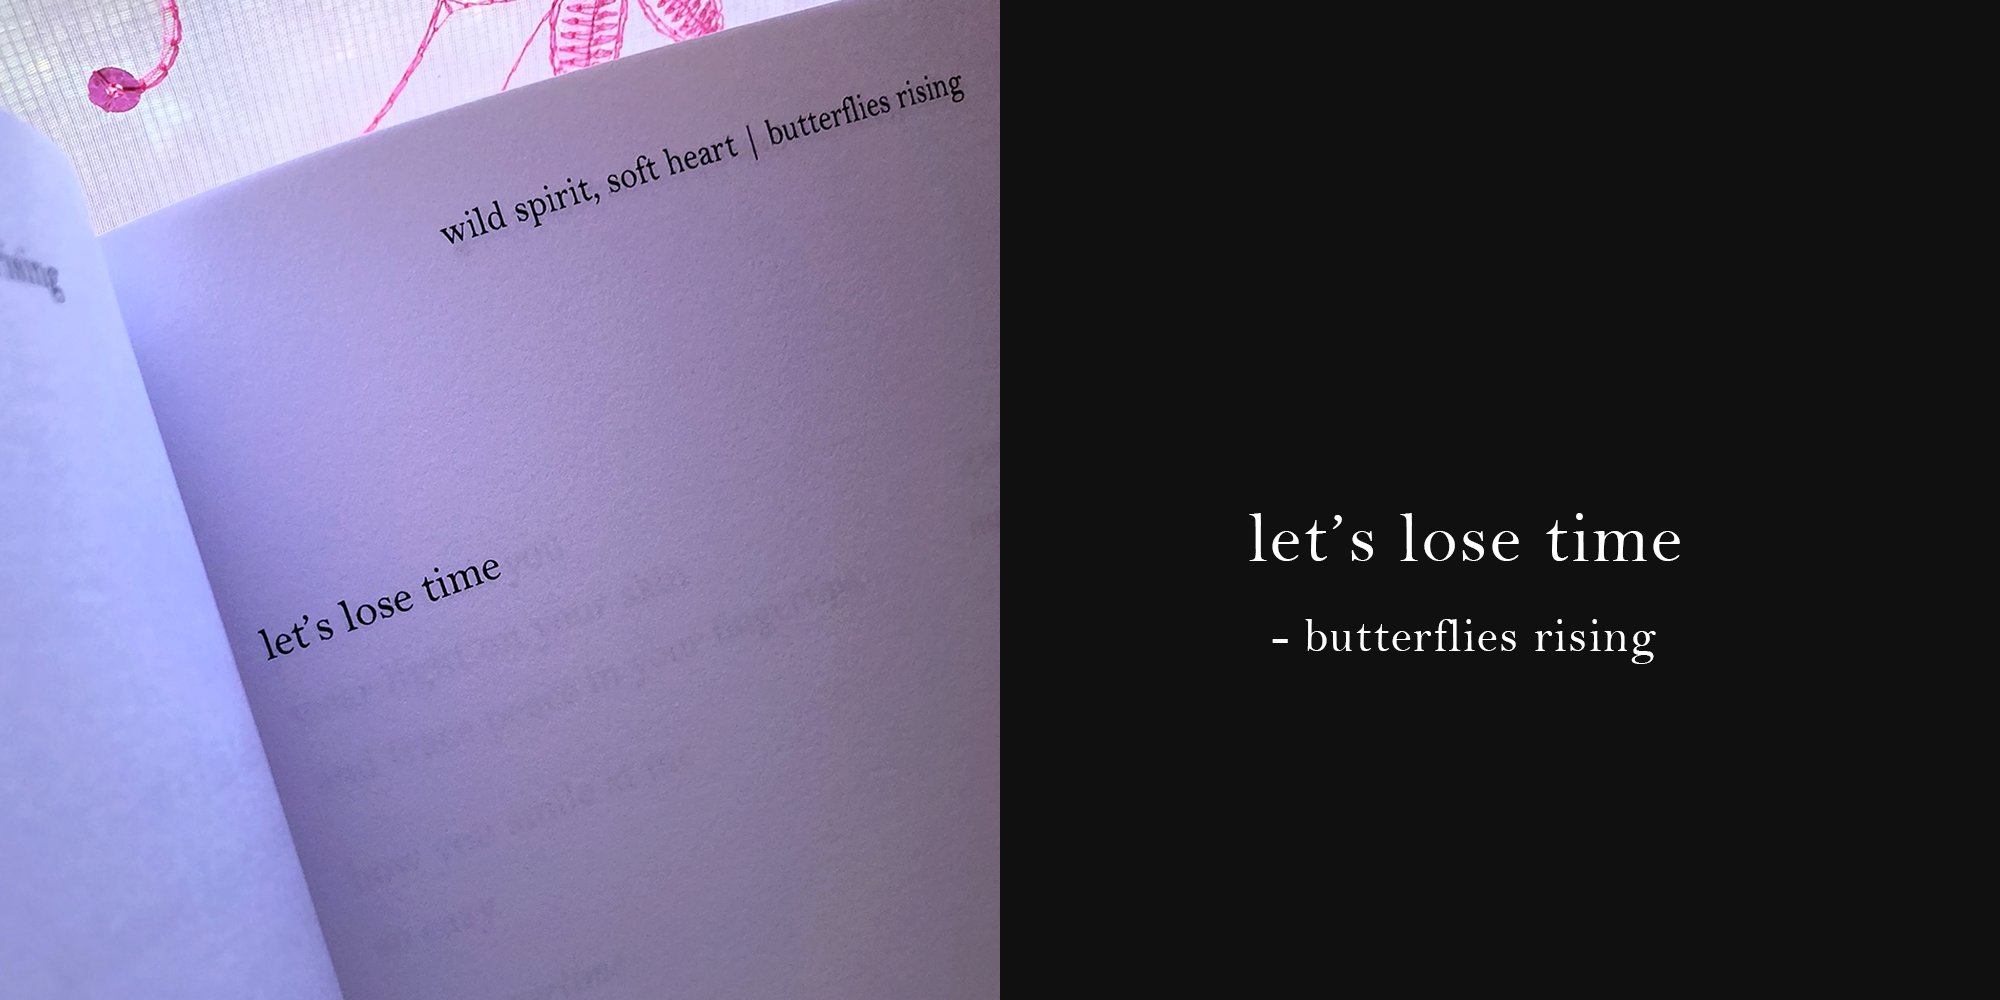 let's lose time - butterflies rising